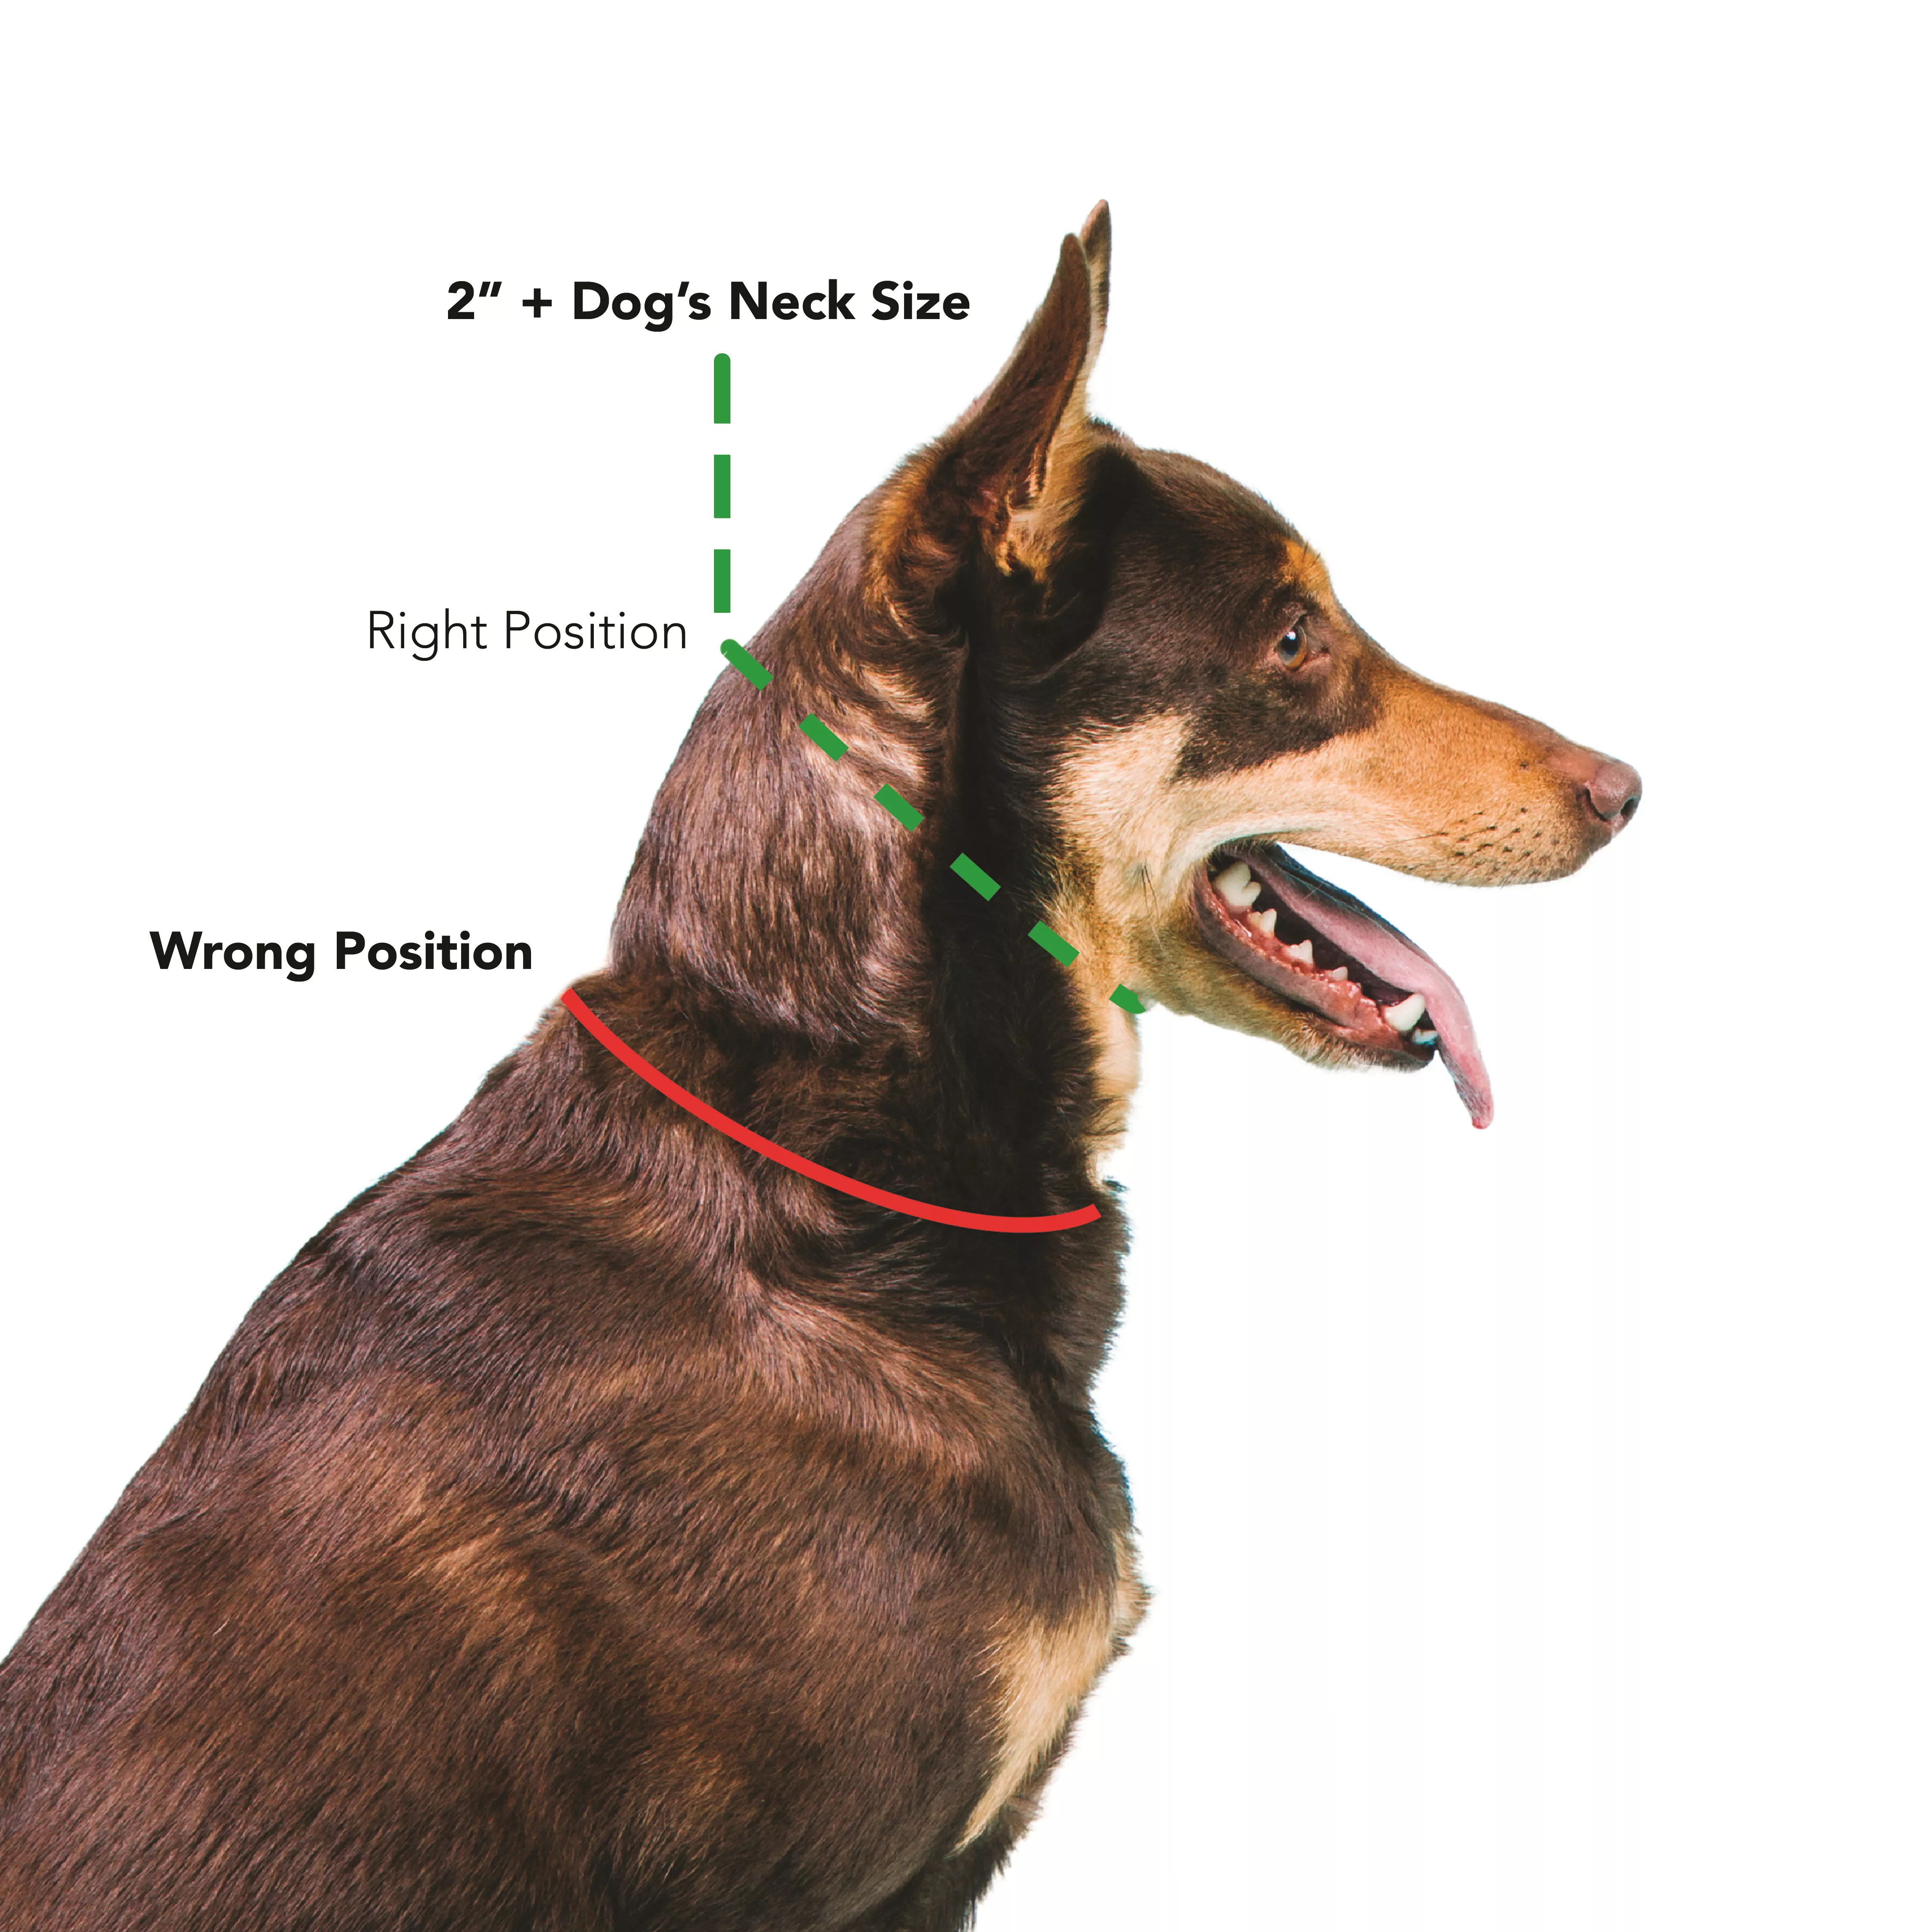 Prong collar placement